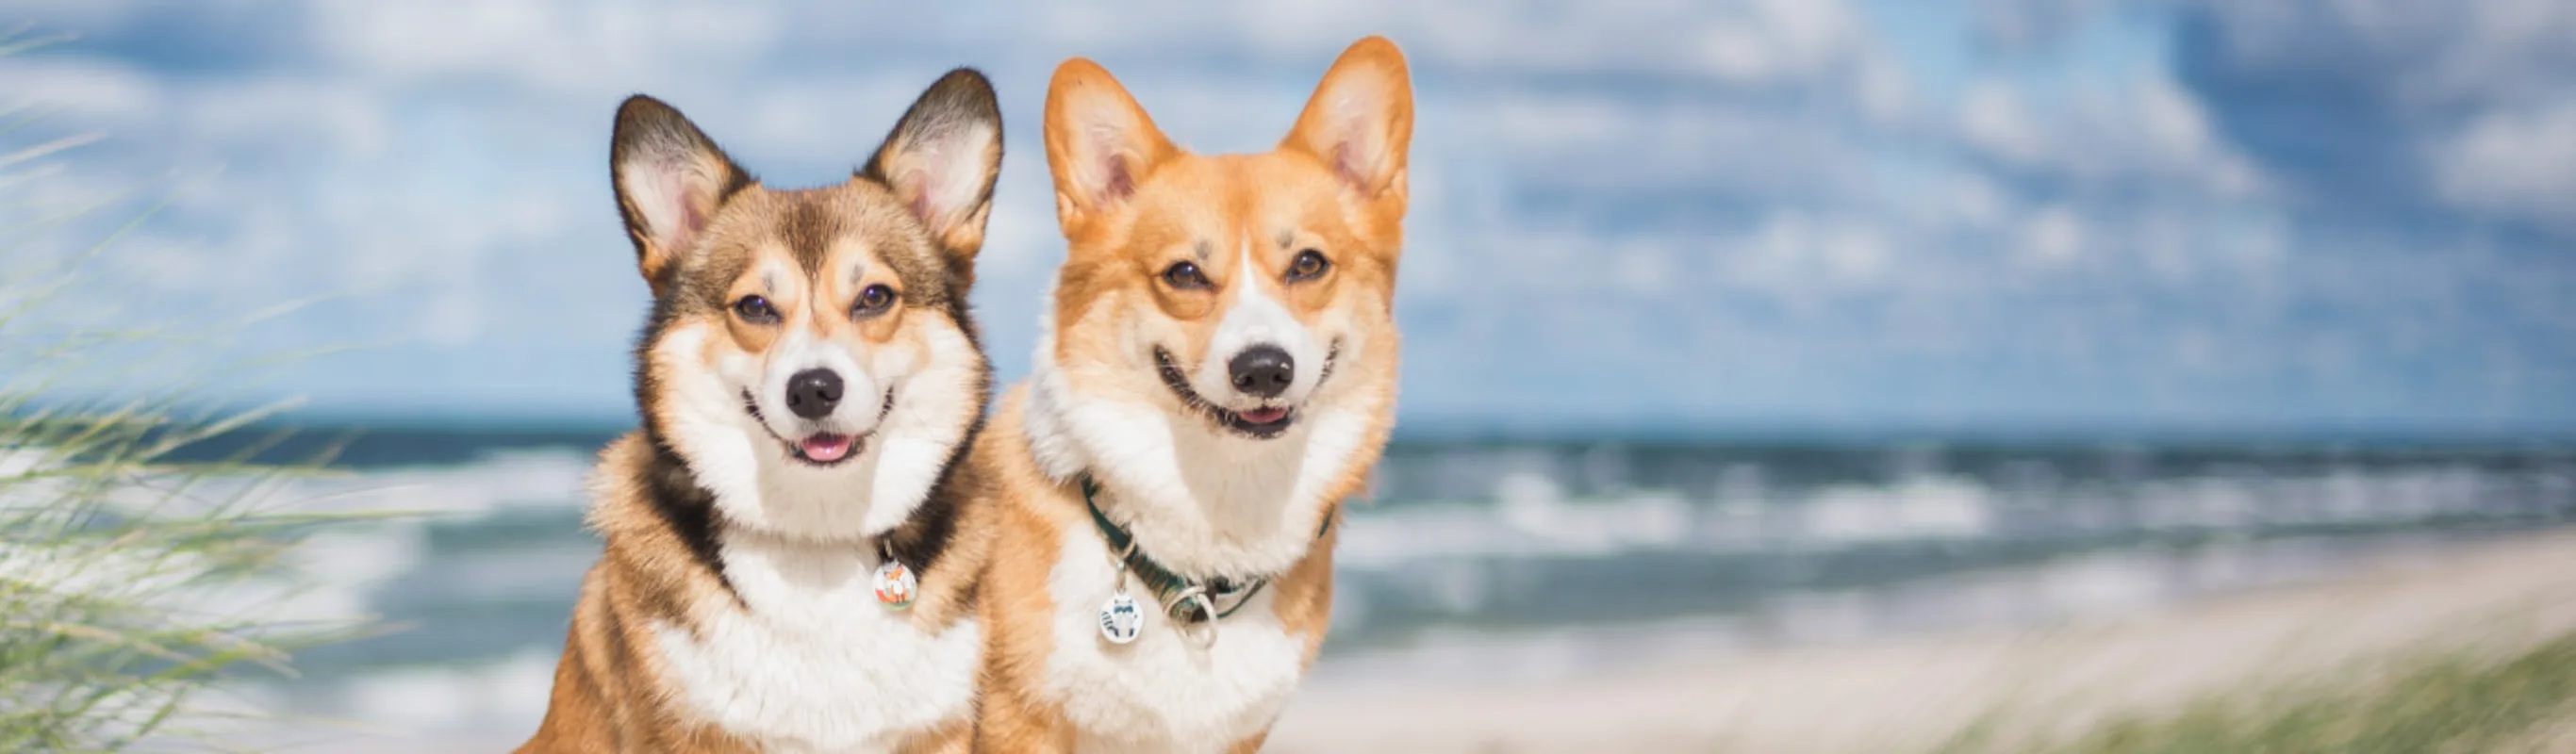 Two corgis at the beach with their tongues out.